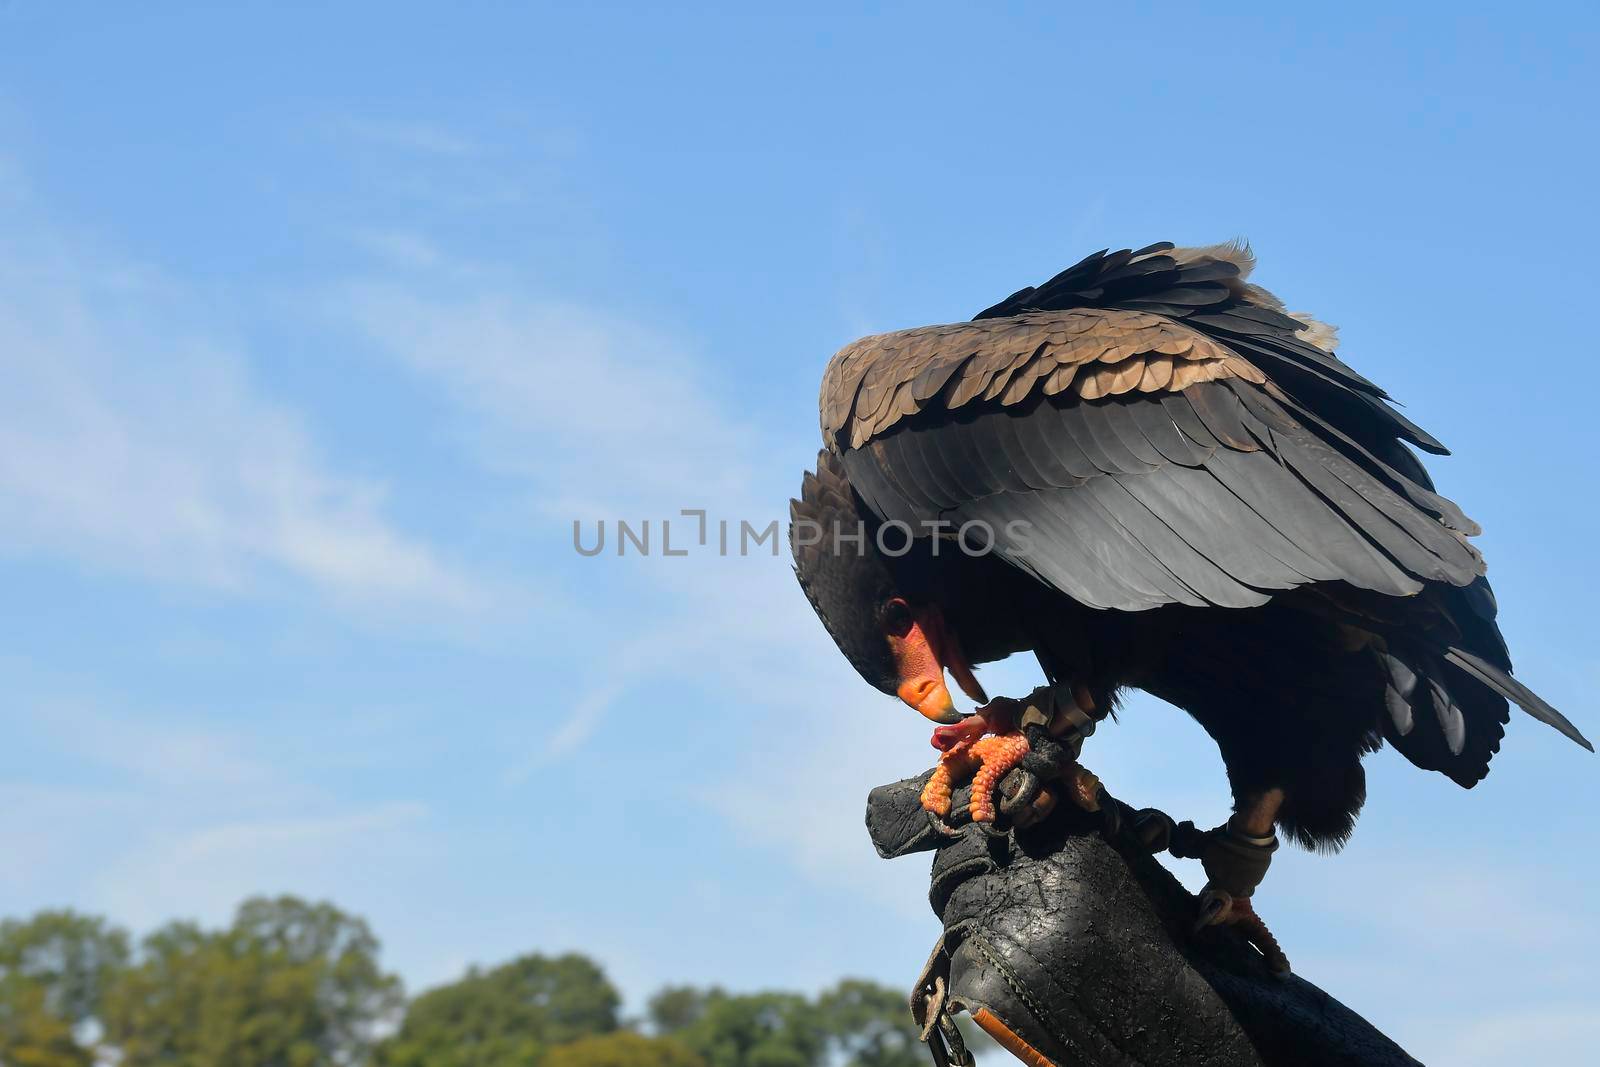 Bird of prey on hand of falconer. Falconer hand holds bird of prey against the background of blue sky by roman_nerud